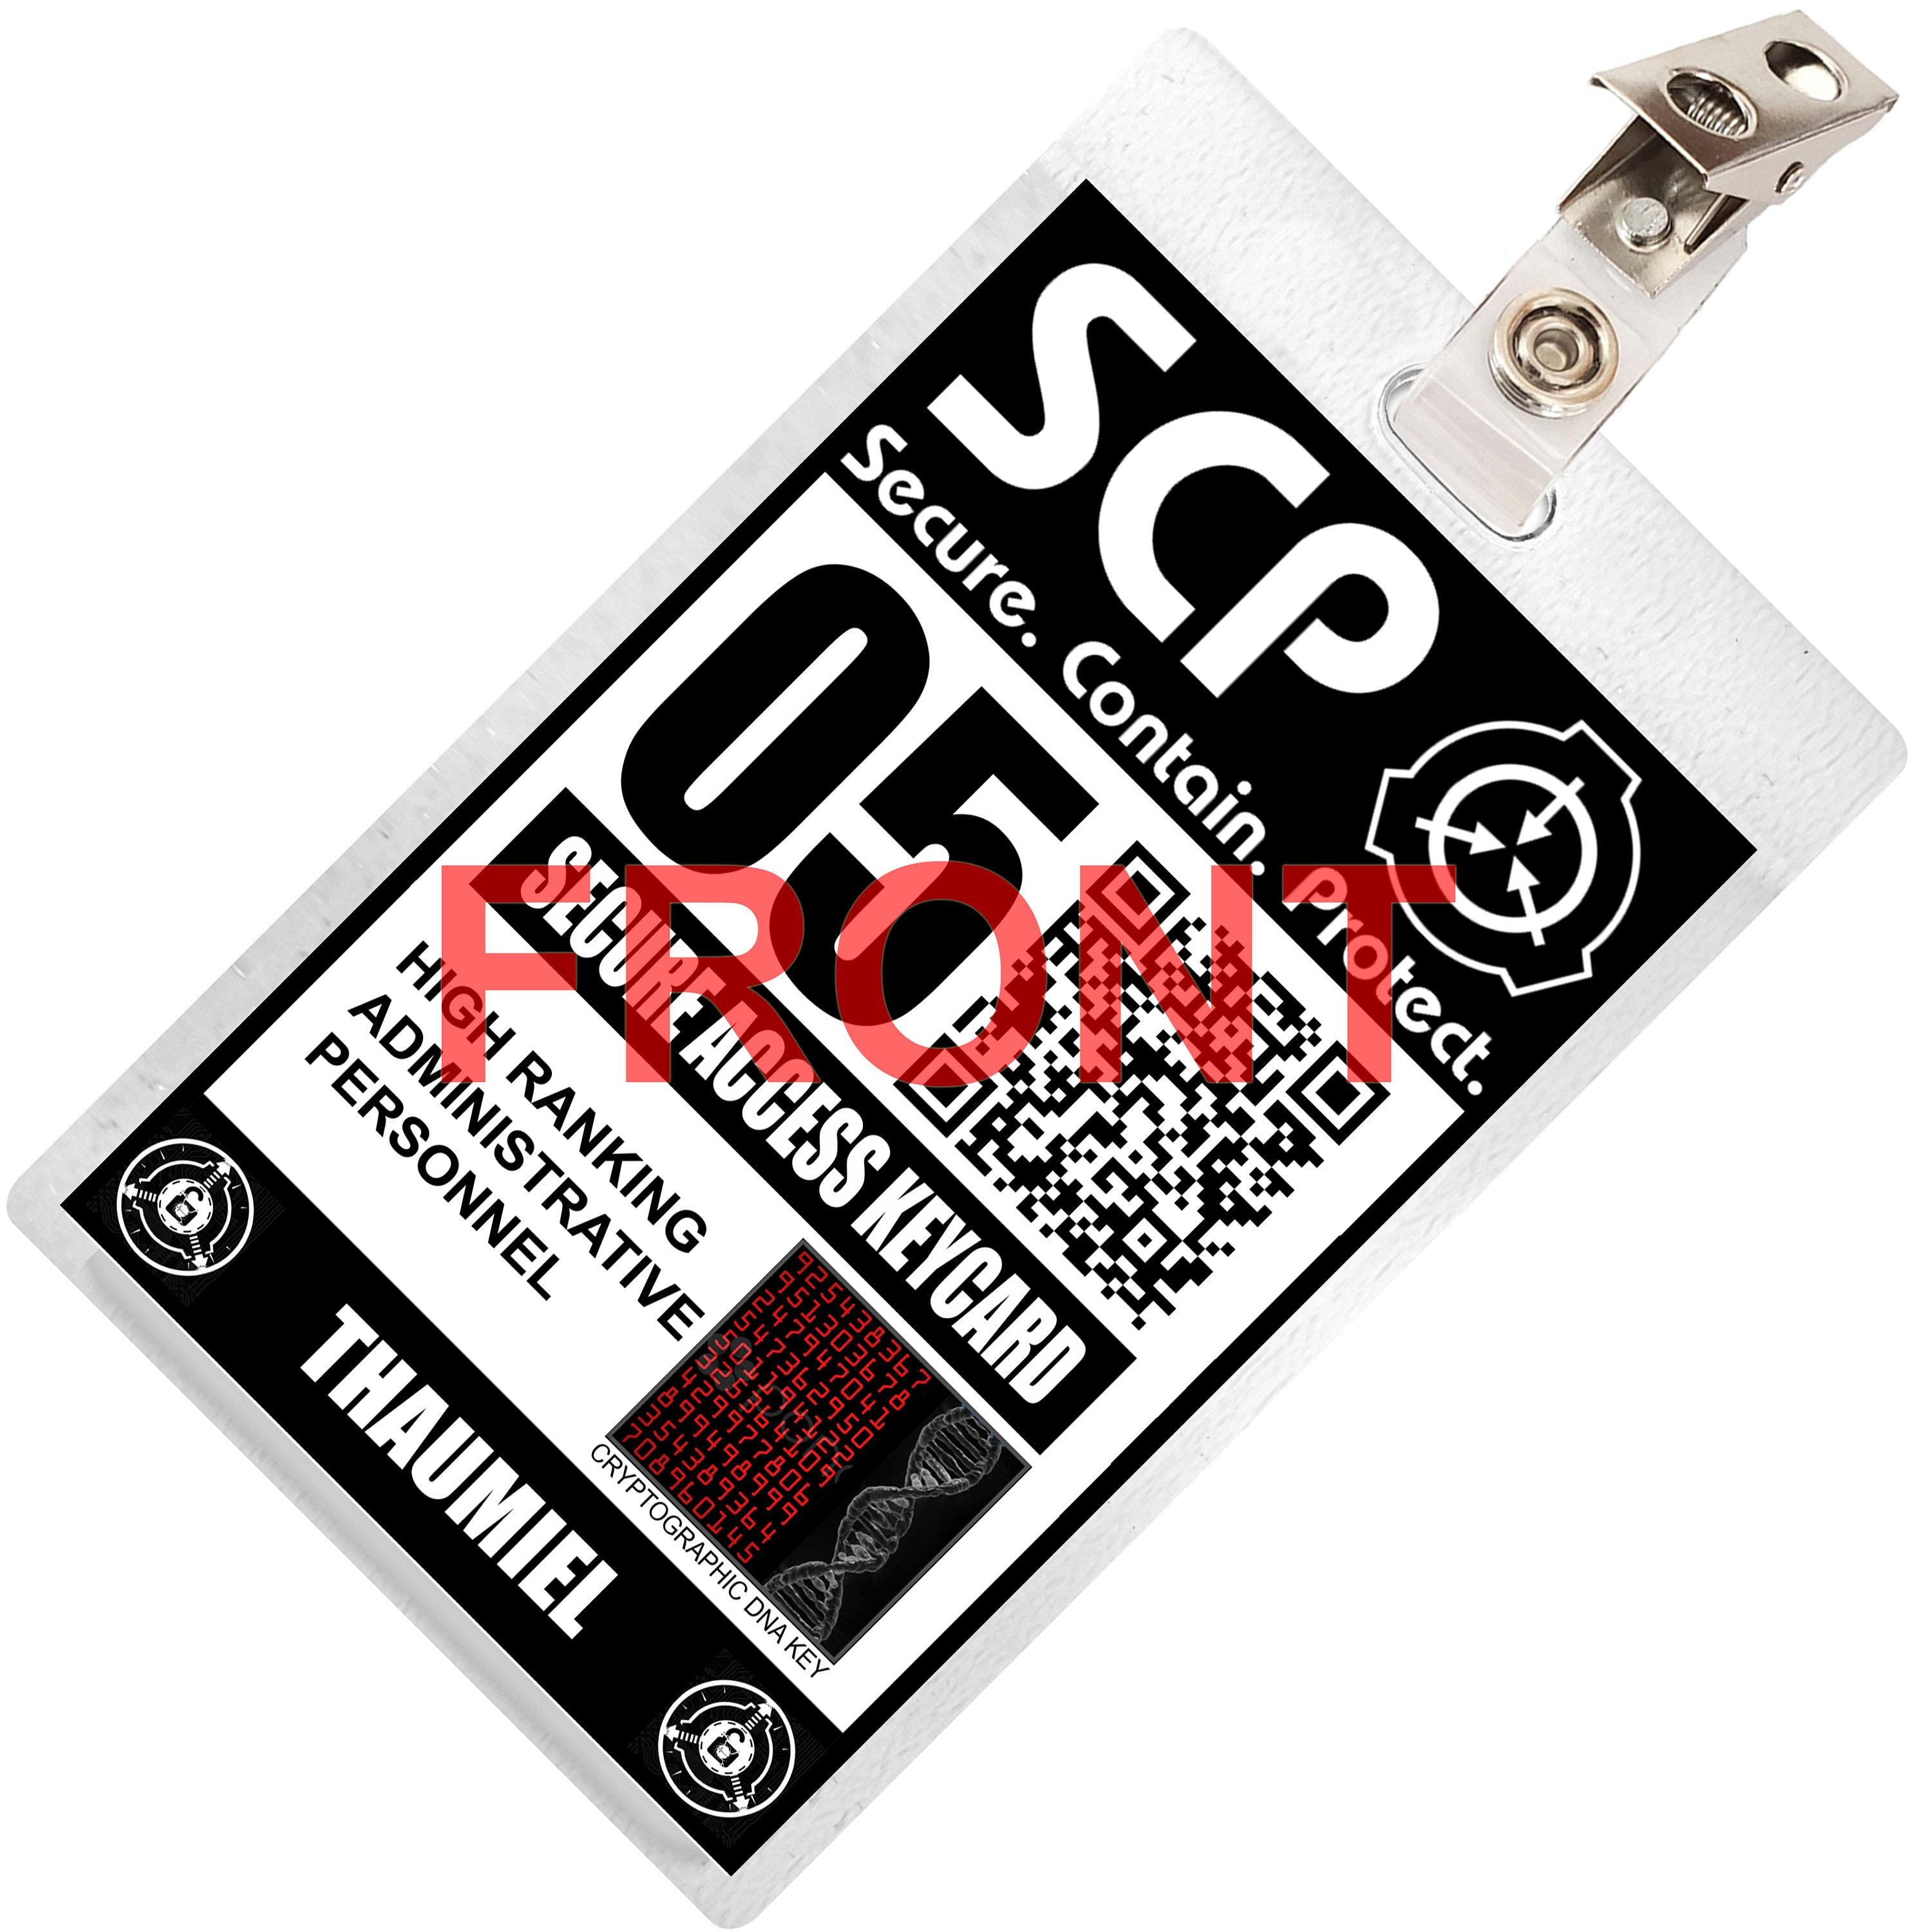 53 Manufacturing] SCP Foundation Peripheral Card Stickers Cup Stickers  Notebook Stationery Lanyard Card Holder Combination D - AliExpress